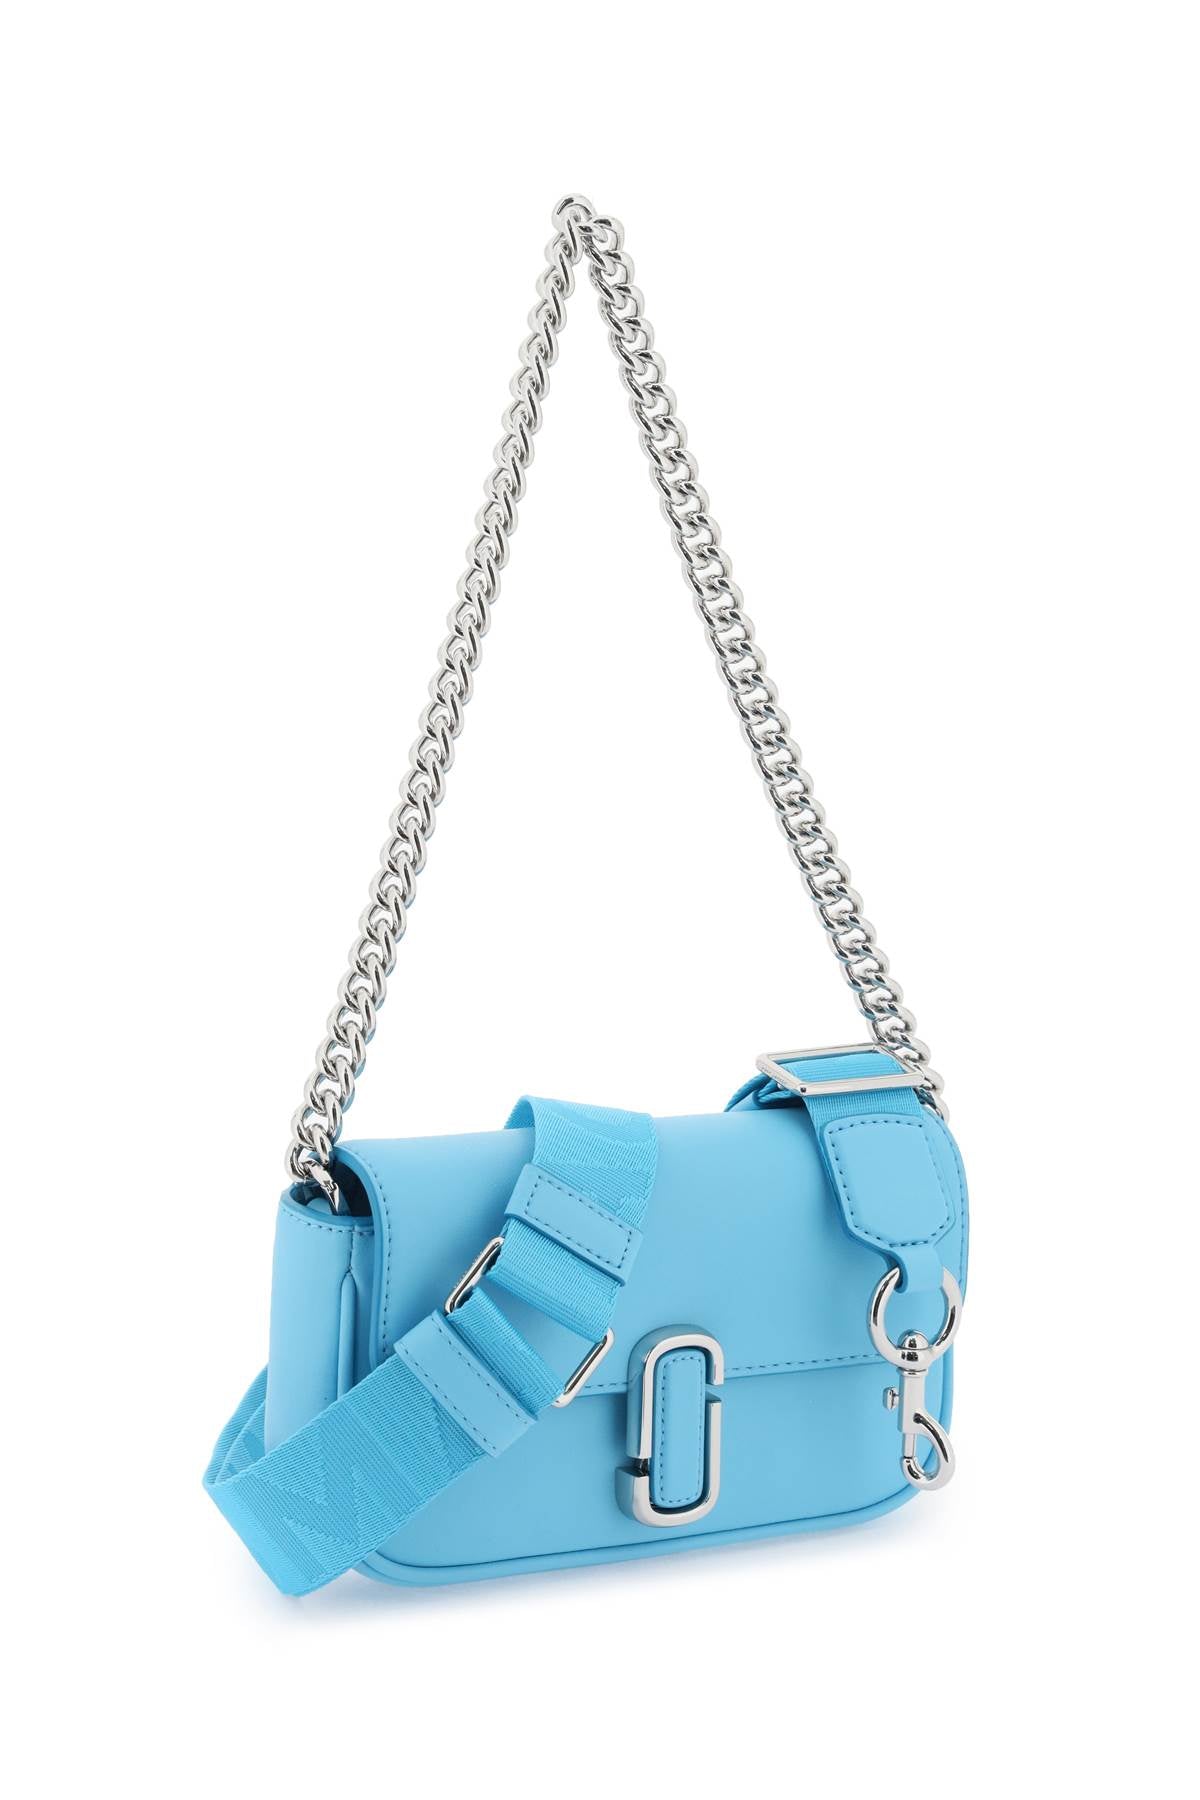 Marc by Marc Jacobs Leather Crossbody Bag - Blue Crossbody Bags, Handbags -  WMA87666 | The RealReal